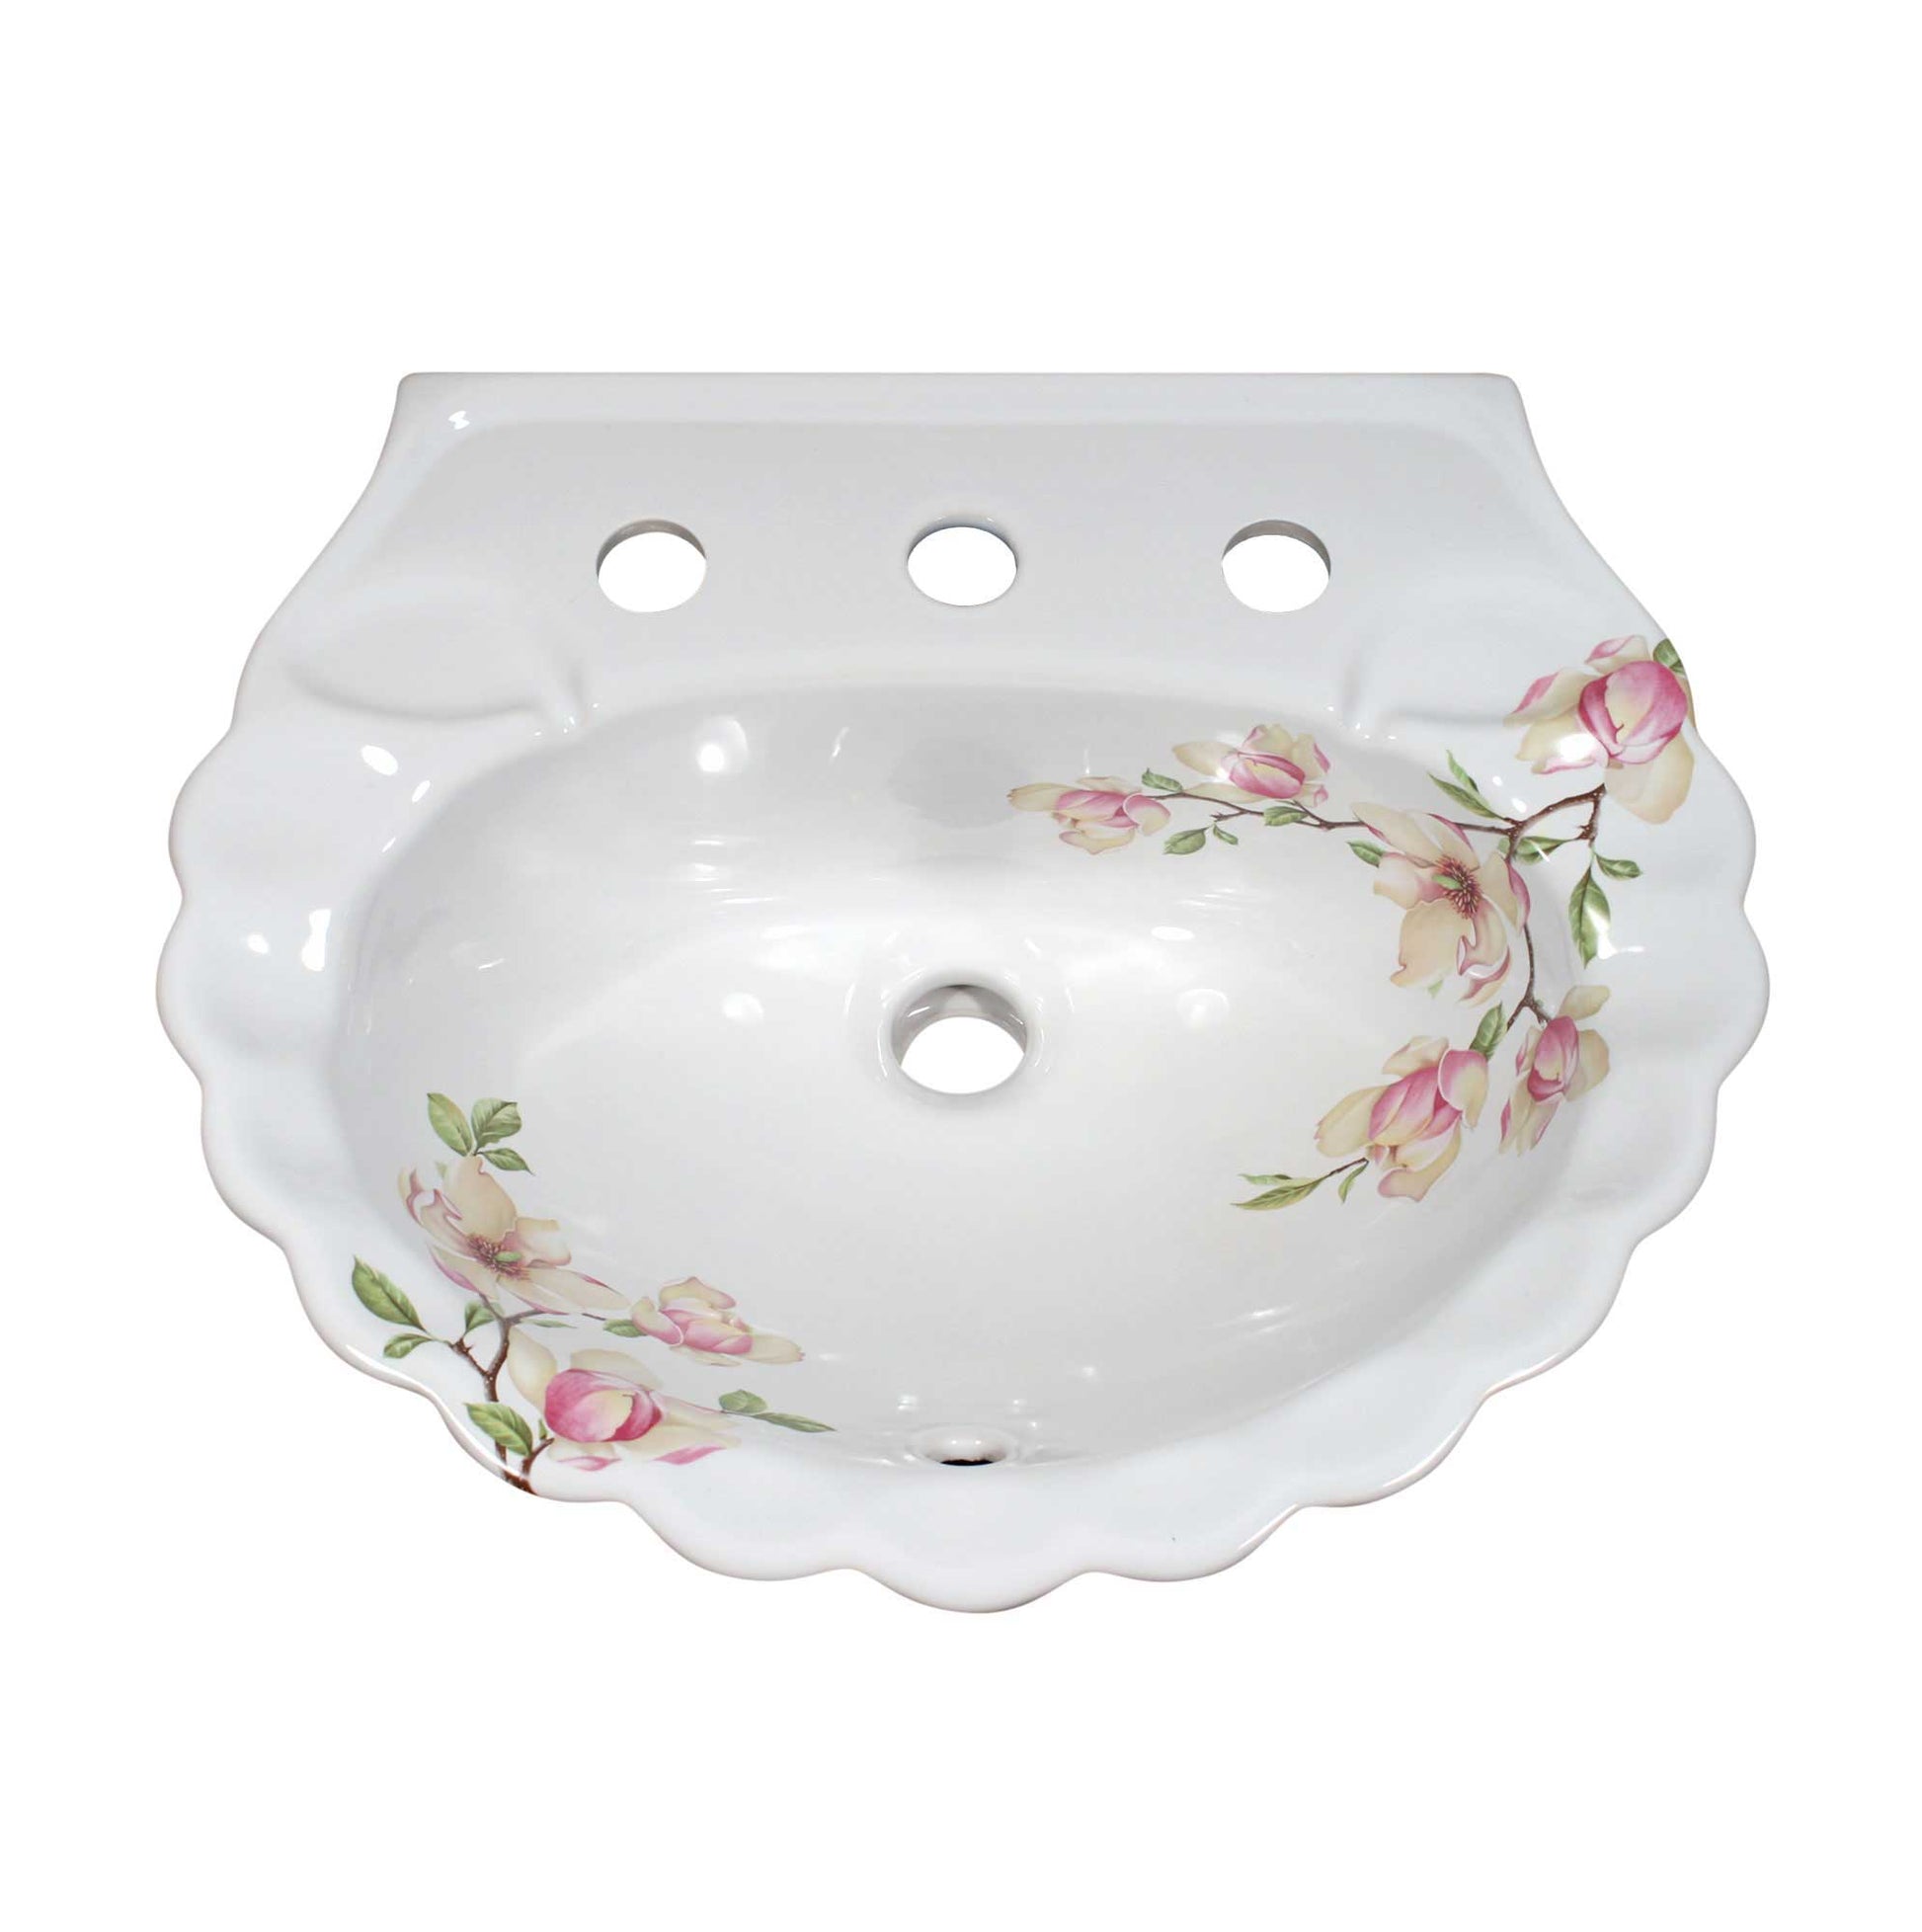 Decorative, scalloped bowl of pedestal sink painted with Magnolia flowers